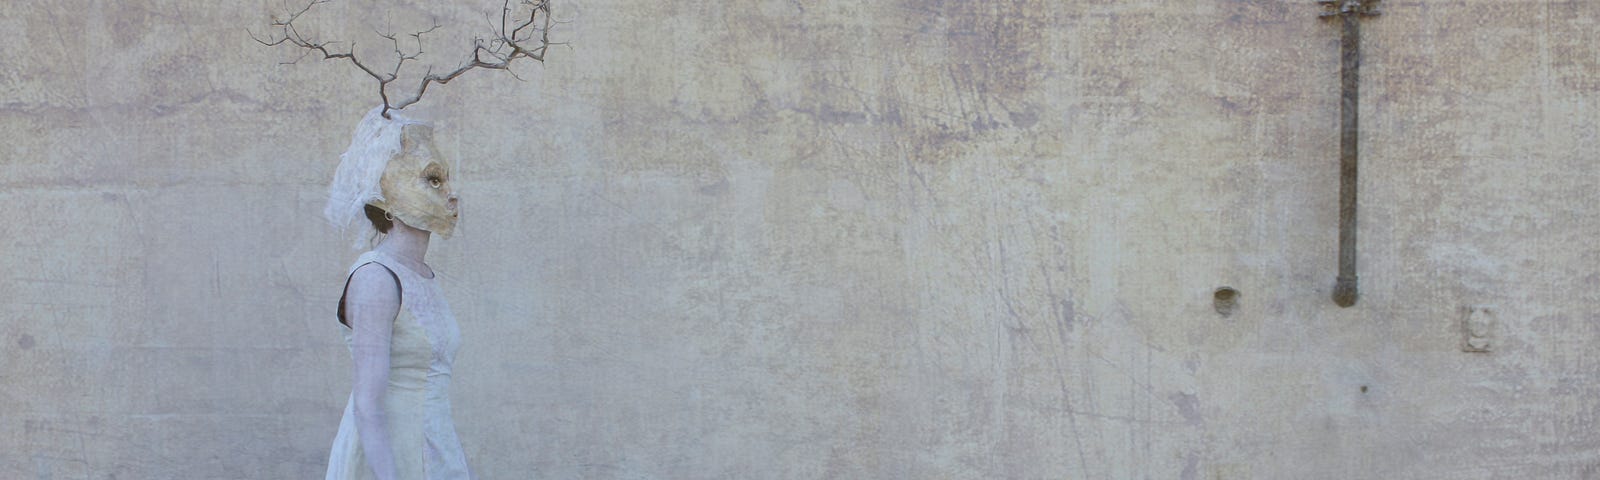 A masked figure in white walk along an old, wall, textured in shades of off-white and beige.